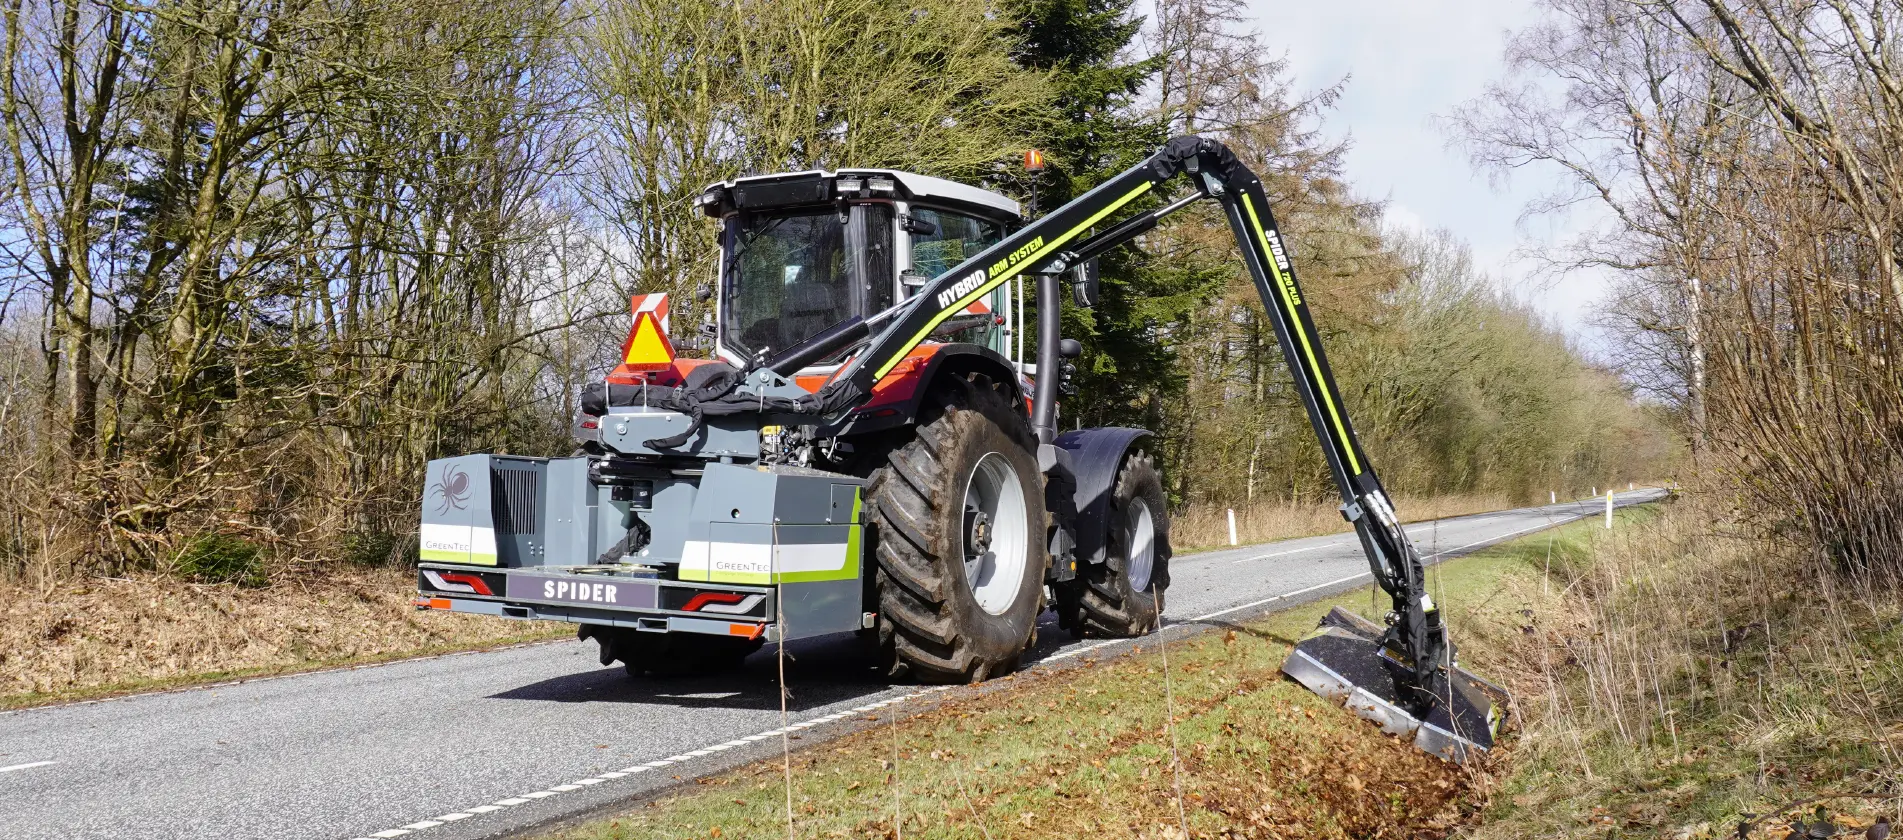 Municipal maintenance of verges and ditches near the road